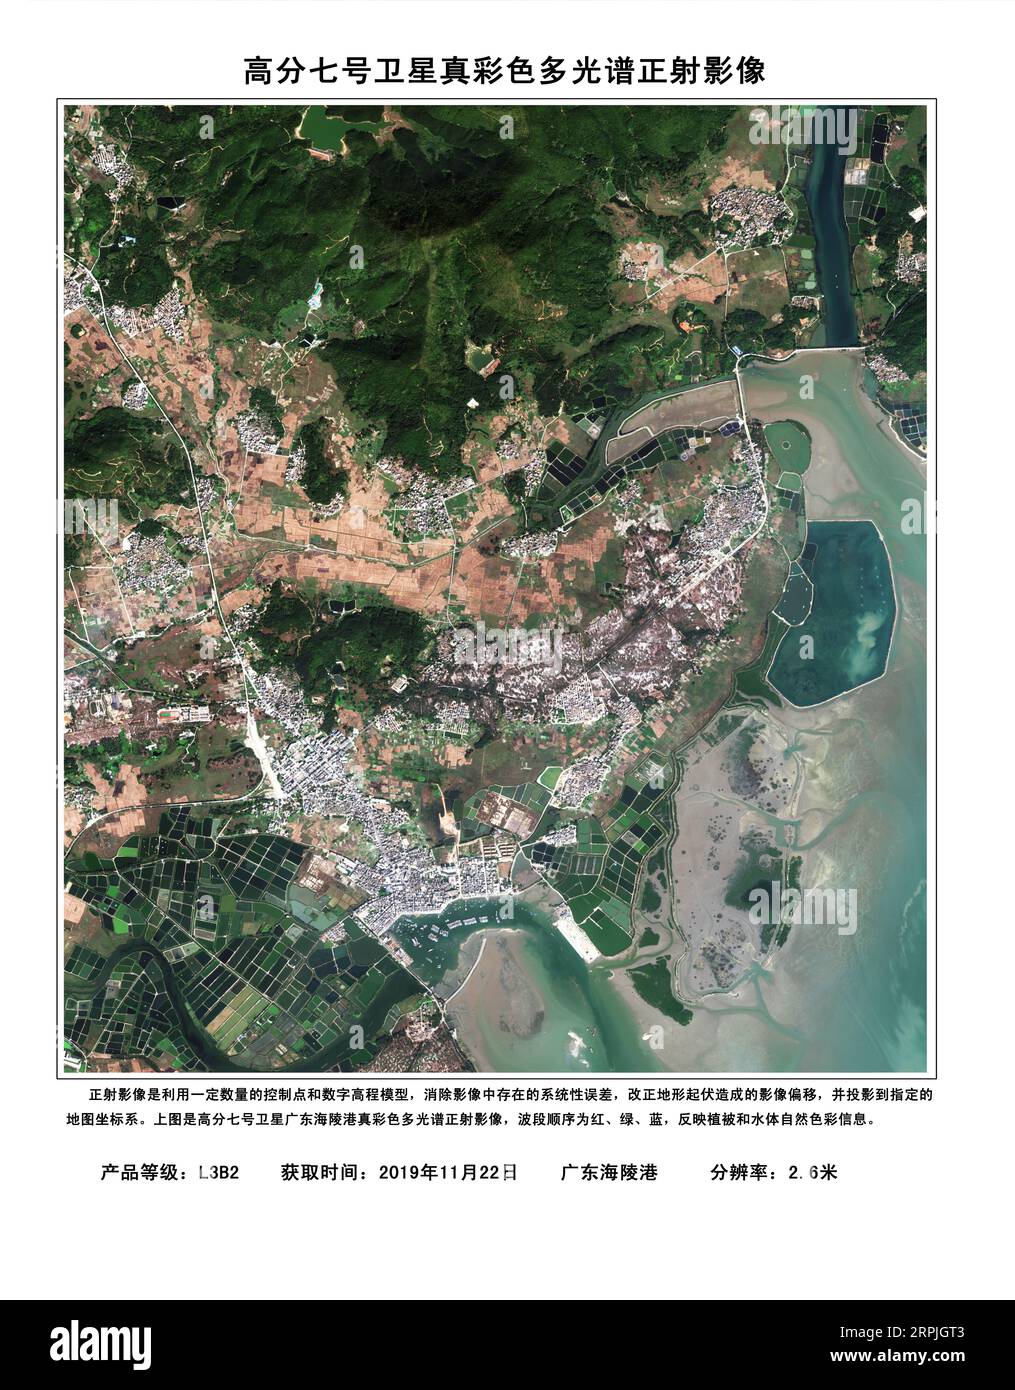 191210 -- BEIJING, Dec. 10, 2019 -- Image shows the multi-spectral orthophoto image of the Hailing port in south China s Guangdong Province with 2.6 m resolution true color based on the data from the Gaofen-7 Earth observation satellite. The China National Space Administration Tuesday released the first batch of three-dimensional images based on the data from the recently launched Gaofen-7 Earth observation satellite. CHINA-BEIJING-GAOFEN-7 EARTH OBSERVATION SATELLITE-FIRST 3D IMAGES-LAUNCH CN ShenxBohan PUBLICATIONxNOTxINxCHN Stock Photo